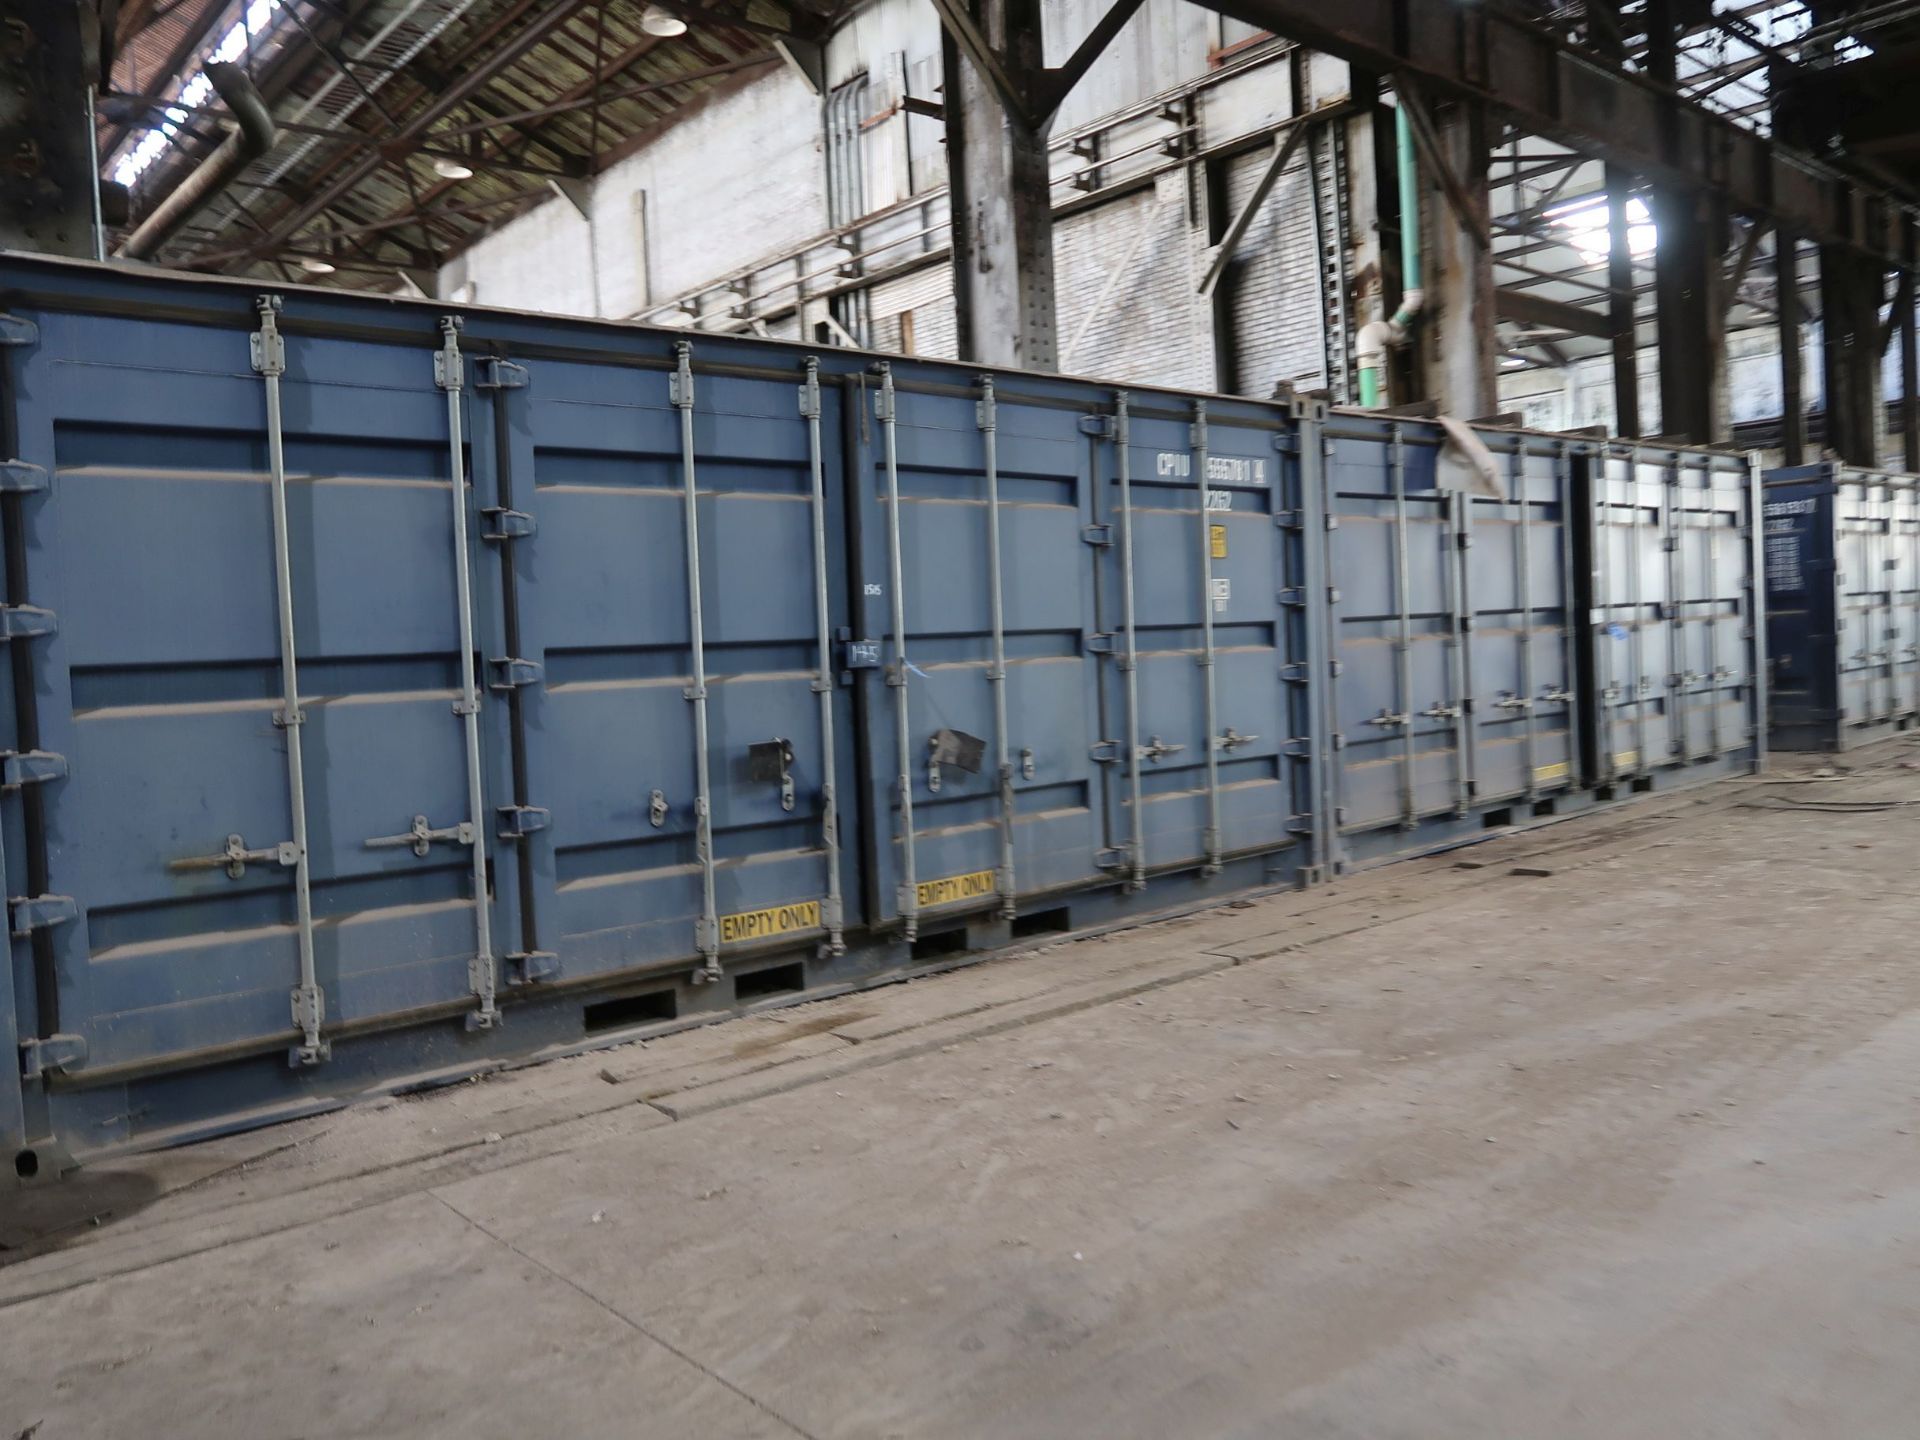 (LOT) (3) 20' X 8', (5) 7' X 8', (3) 5' X 8' CONEX STORAGE CONTAINERS - Image 2 of 3